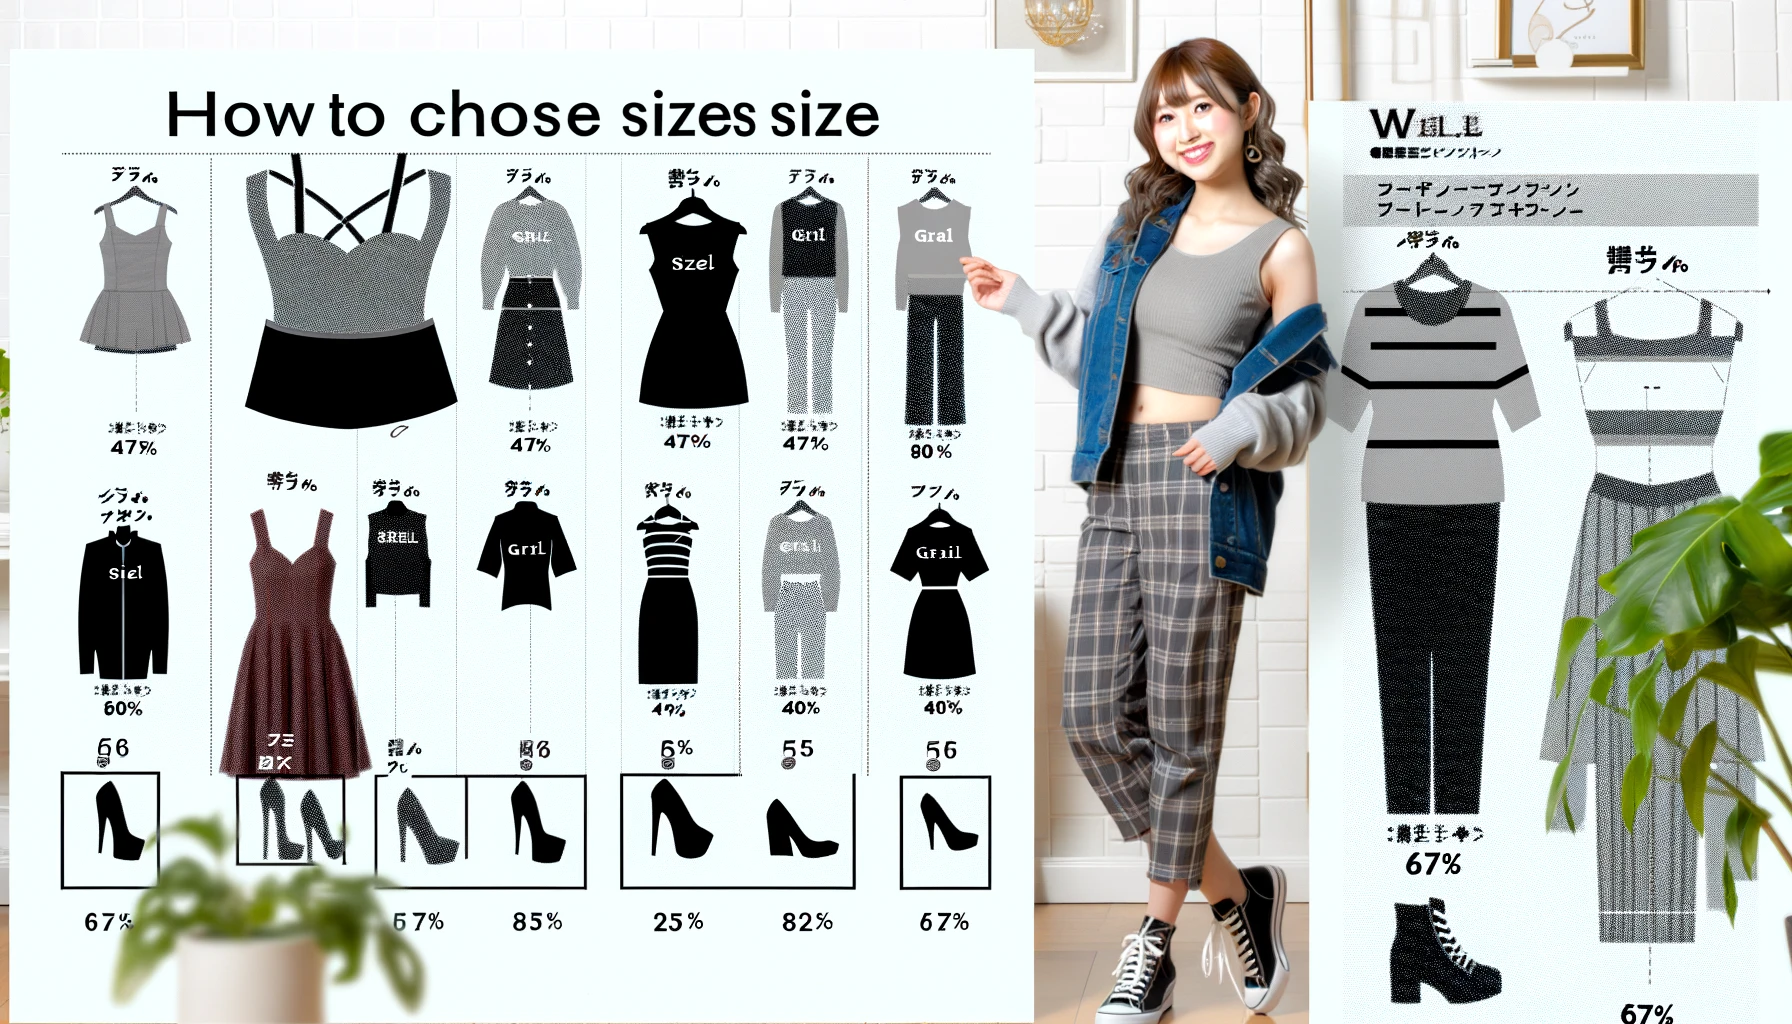 An image showing how to choose sizes for women's budget-friendly fashion brand GRL (Grail). The image features a stylish Japanese woman wearing trendy outfits from GRL. Various size charts and measurement tips are displayed, highlighting different body types and sizes. The background includes subtle design elements like fashion icons and a neutral, fashionable setting.